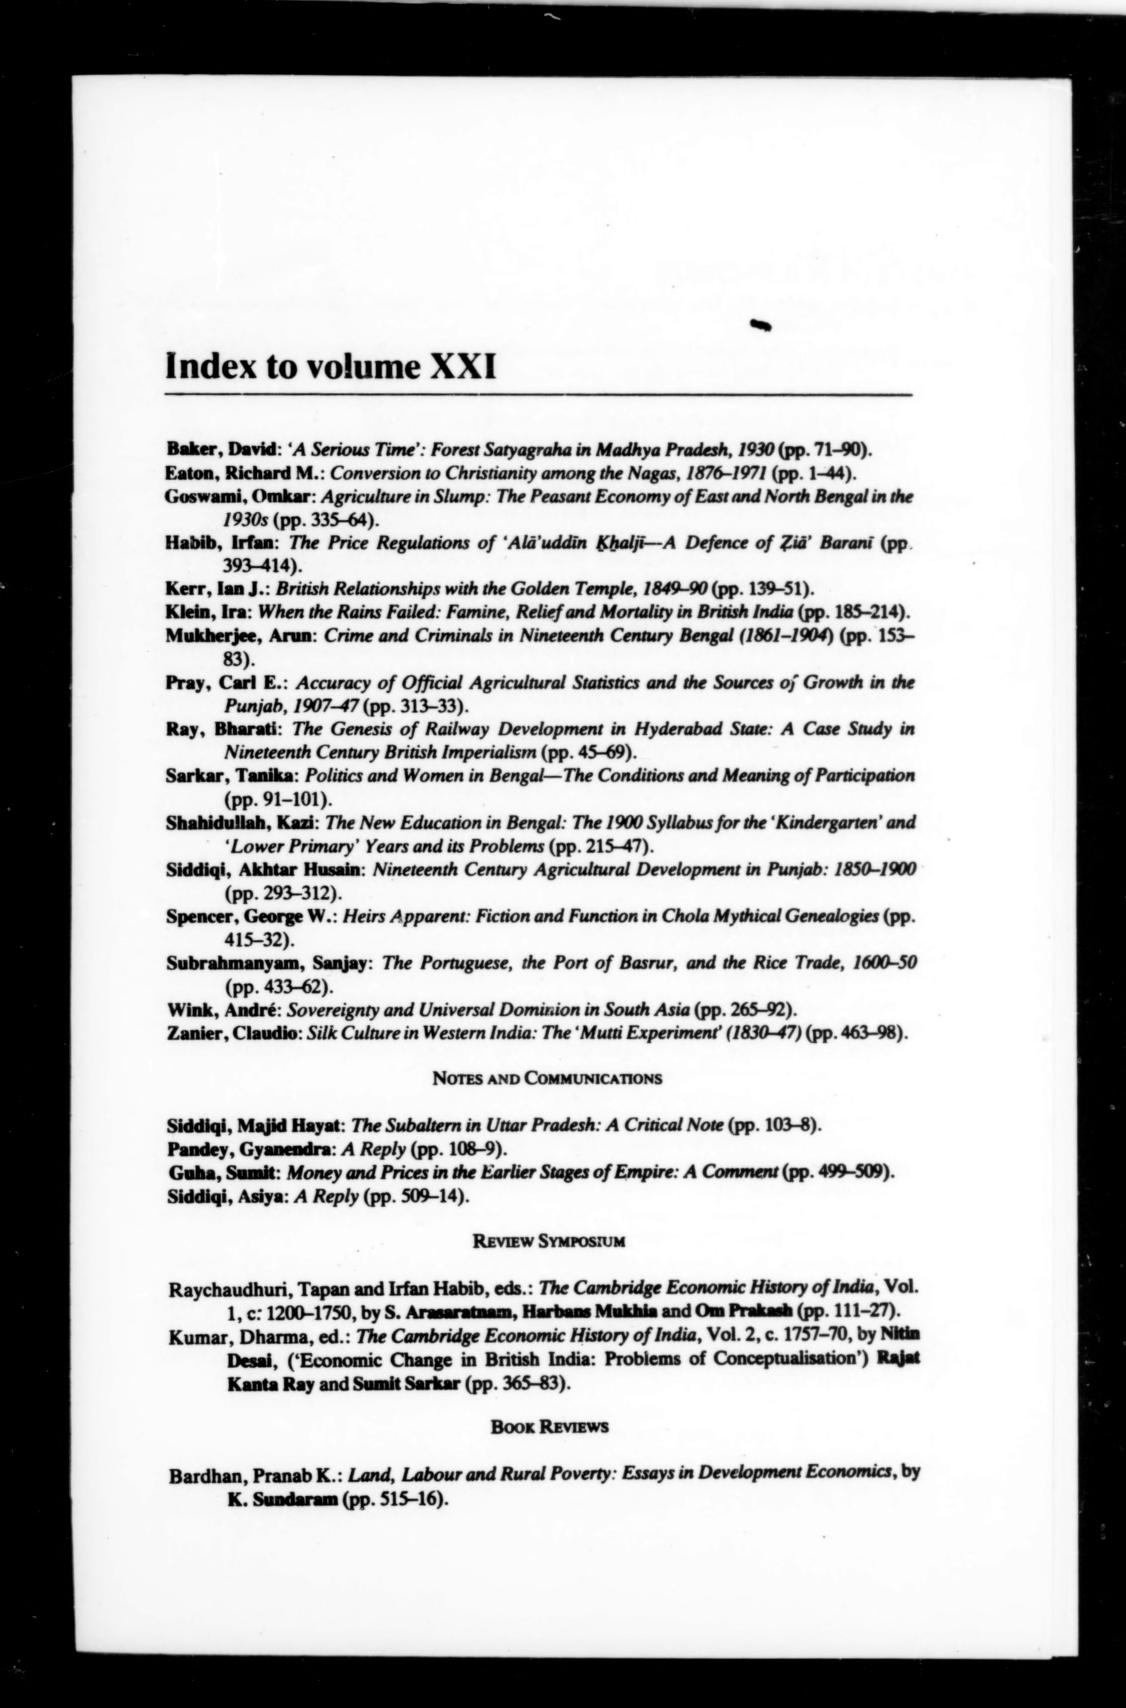 The Indian Economic and Social History Review 1984: Vol 21 Index 